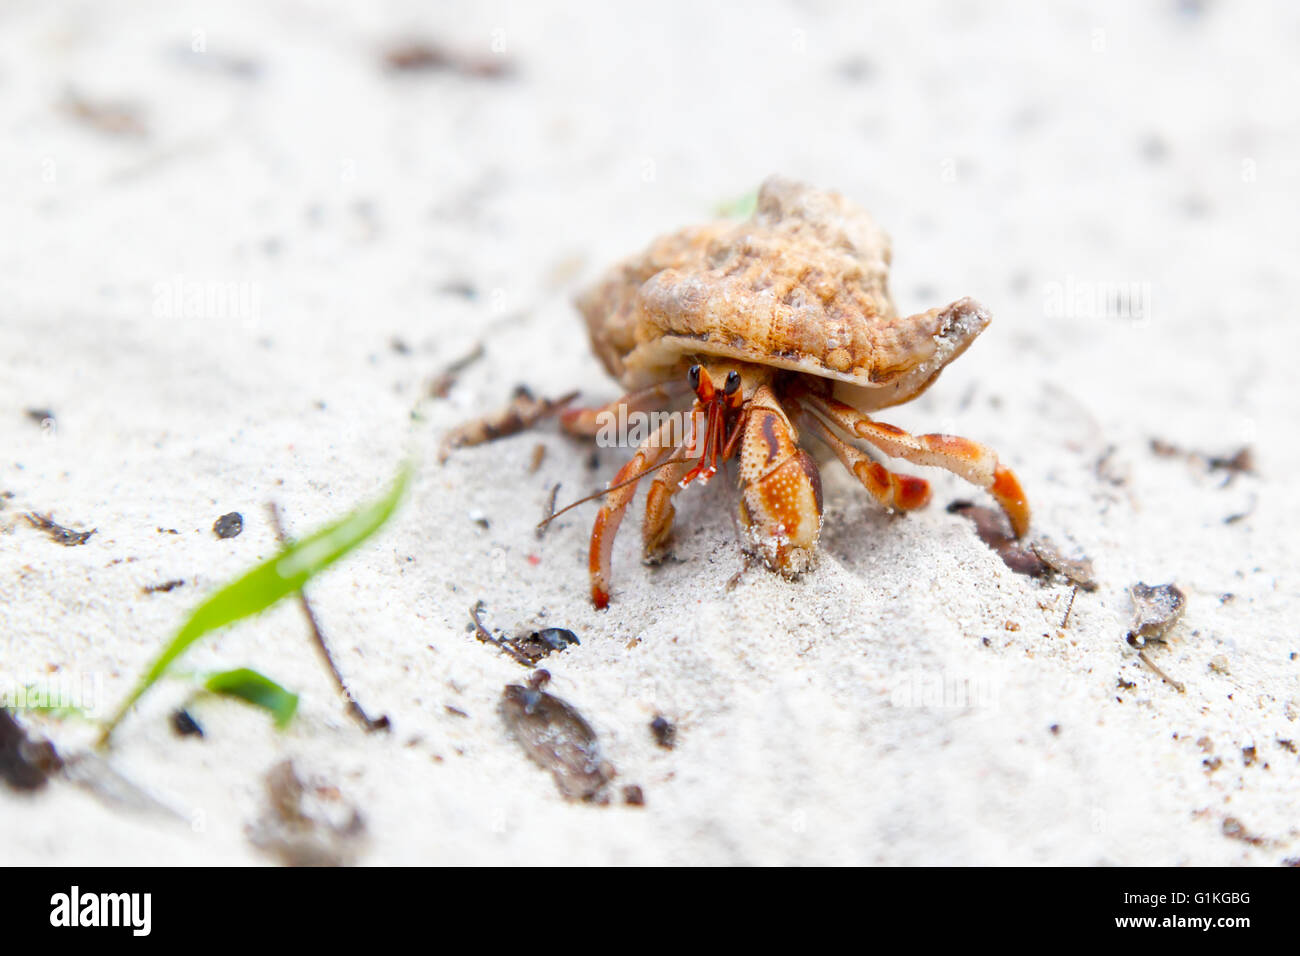 A small orange hermit crab walking on the white sand of a tropical beach Stock Photo